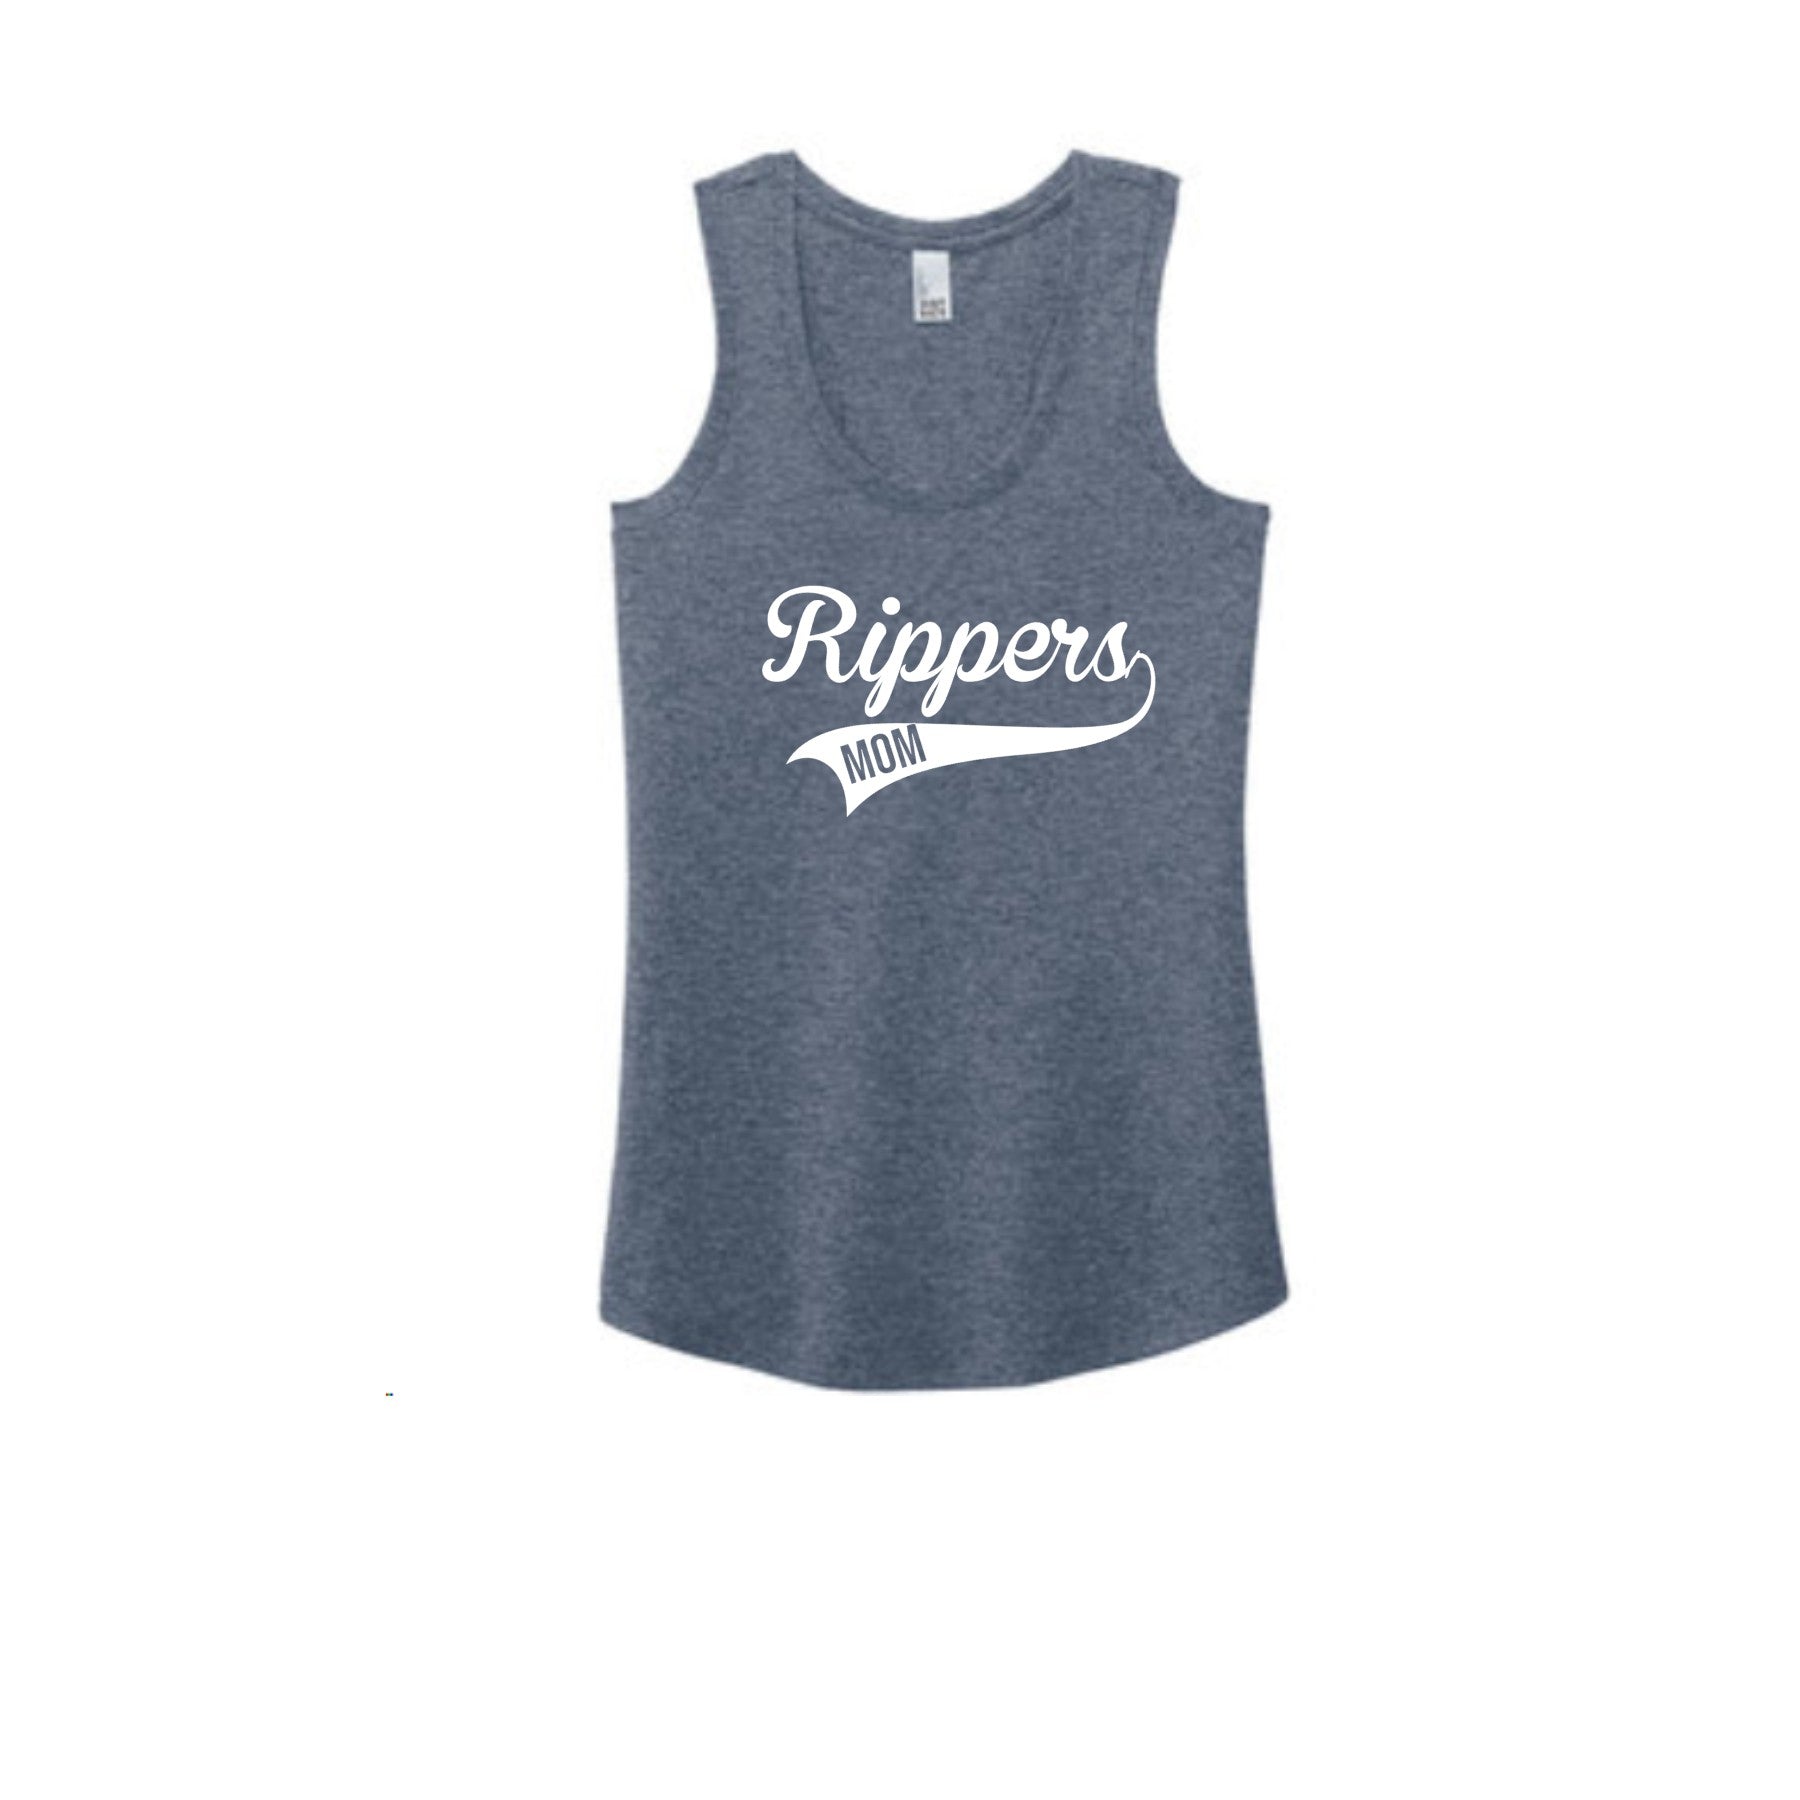 Rippers Baseball District Tank Top - NAVY